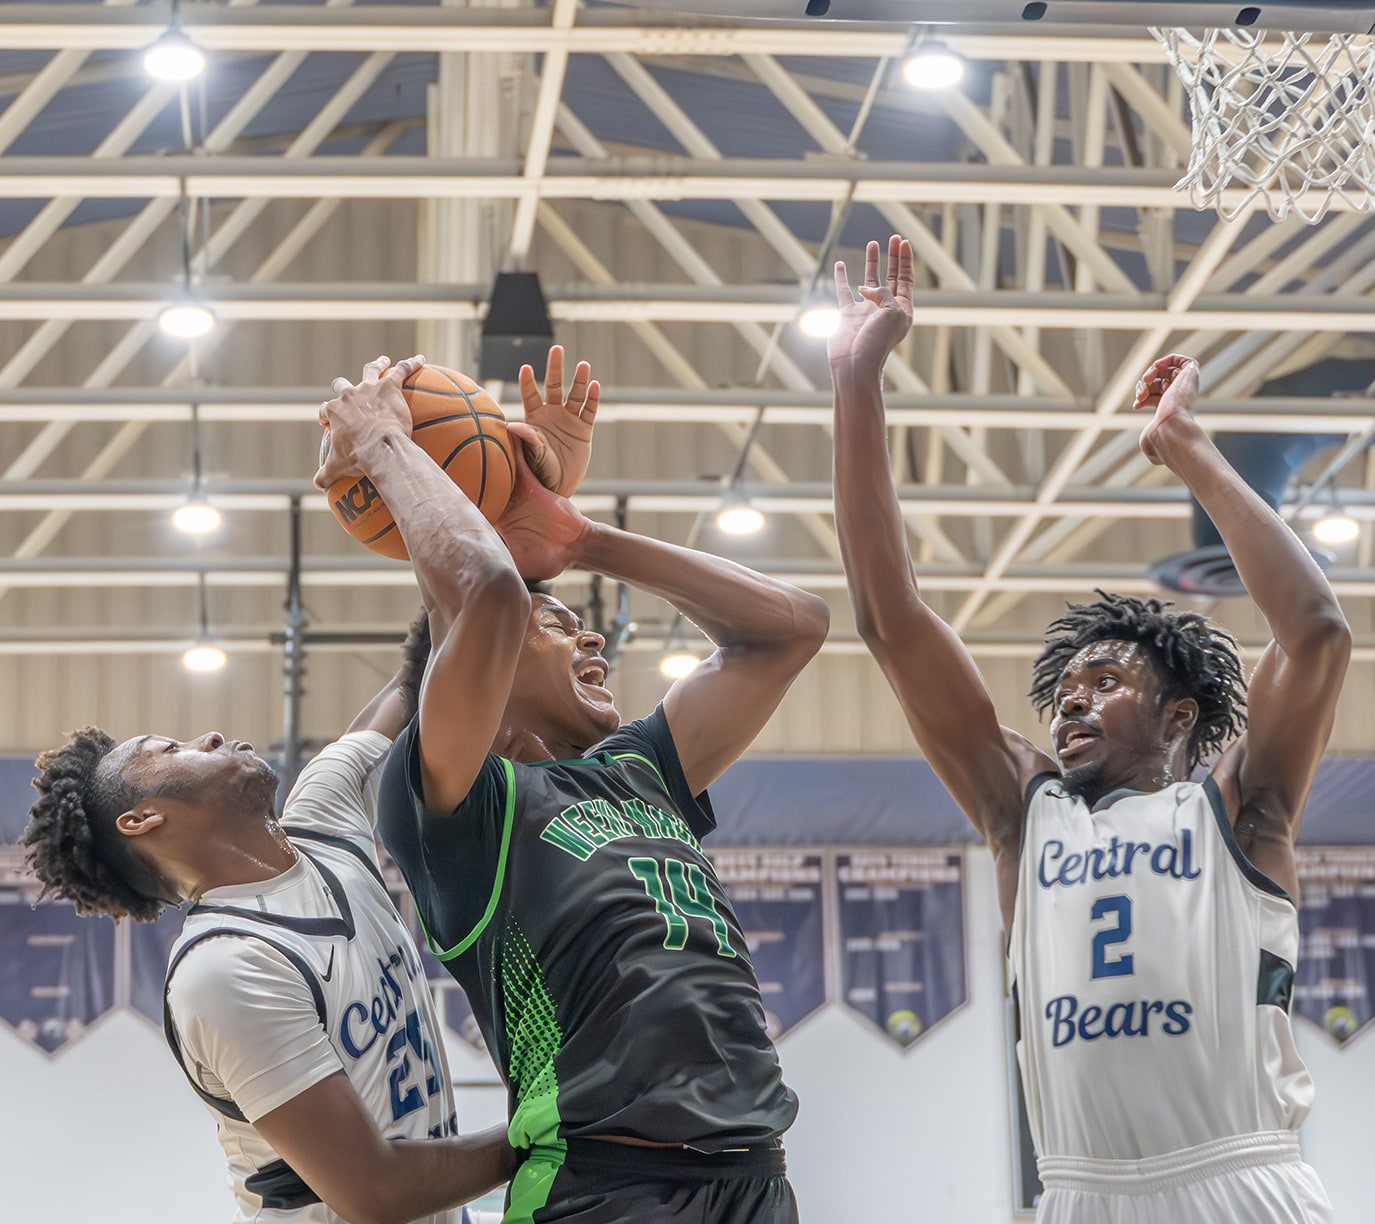 Weeki Wachee High, 14, Isaac Priester draws the attention of Central High, 2, Jerome “JD” Watson and ,25, Tykel Williams in the 4A District 9 semifinal at Central High Thursday night. [Photo by Joe DiCristofalo]